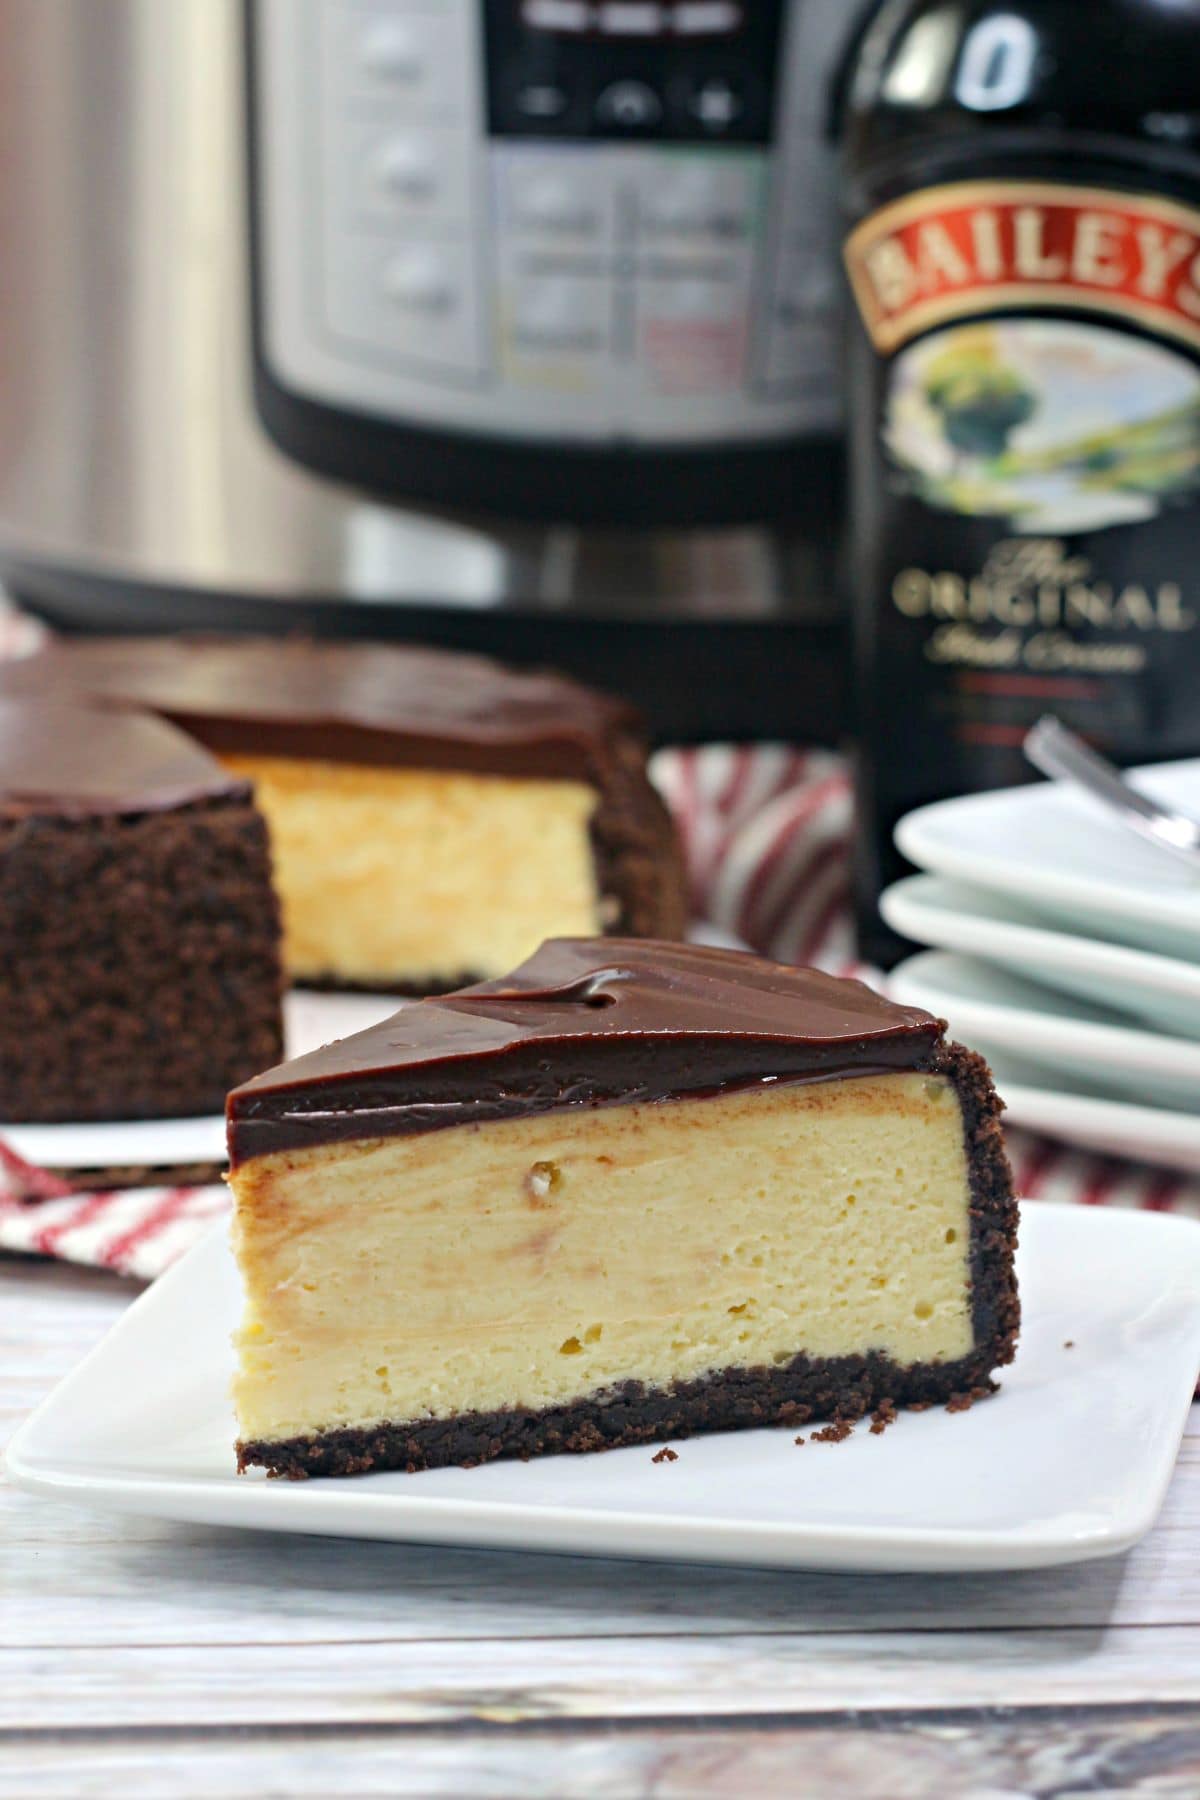 A slice of Baileys Cheesecake on plate with a bottle of Baileys and an instant pot in the background